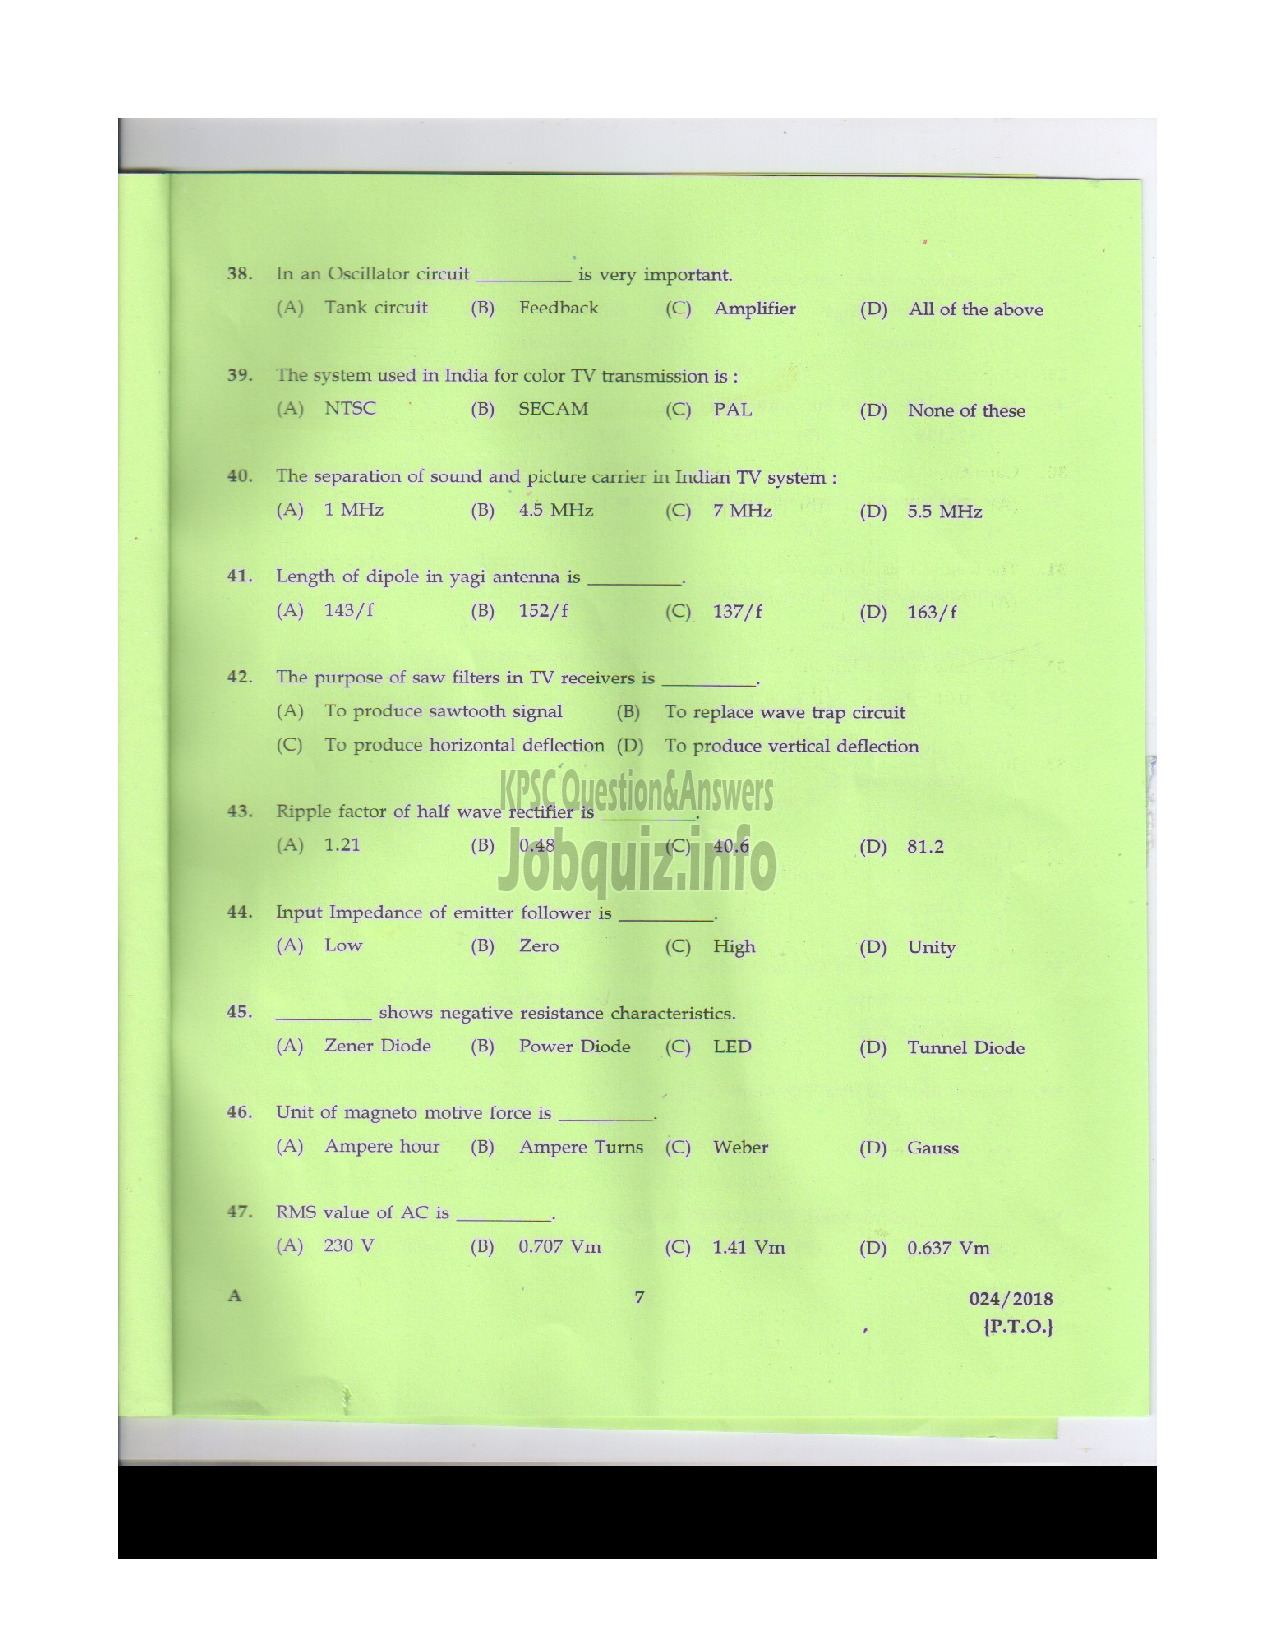 Kerala PSC Question Paper - POLICE CONSTABLE TELECOMMUNICATIONS POLICE-6